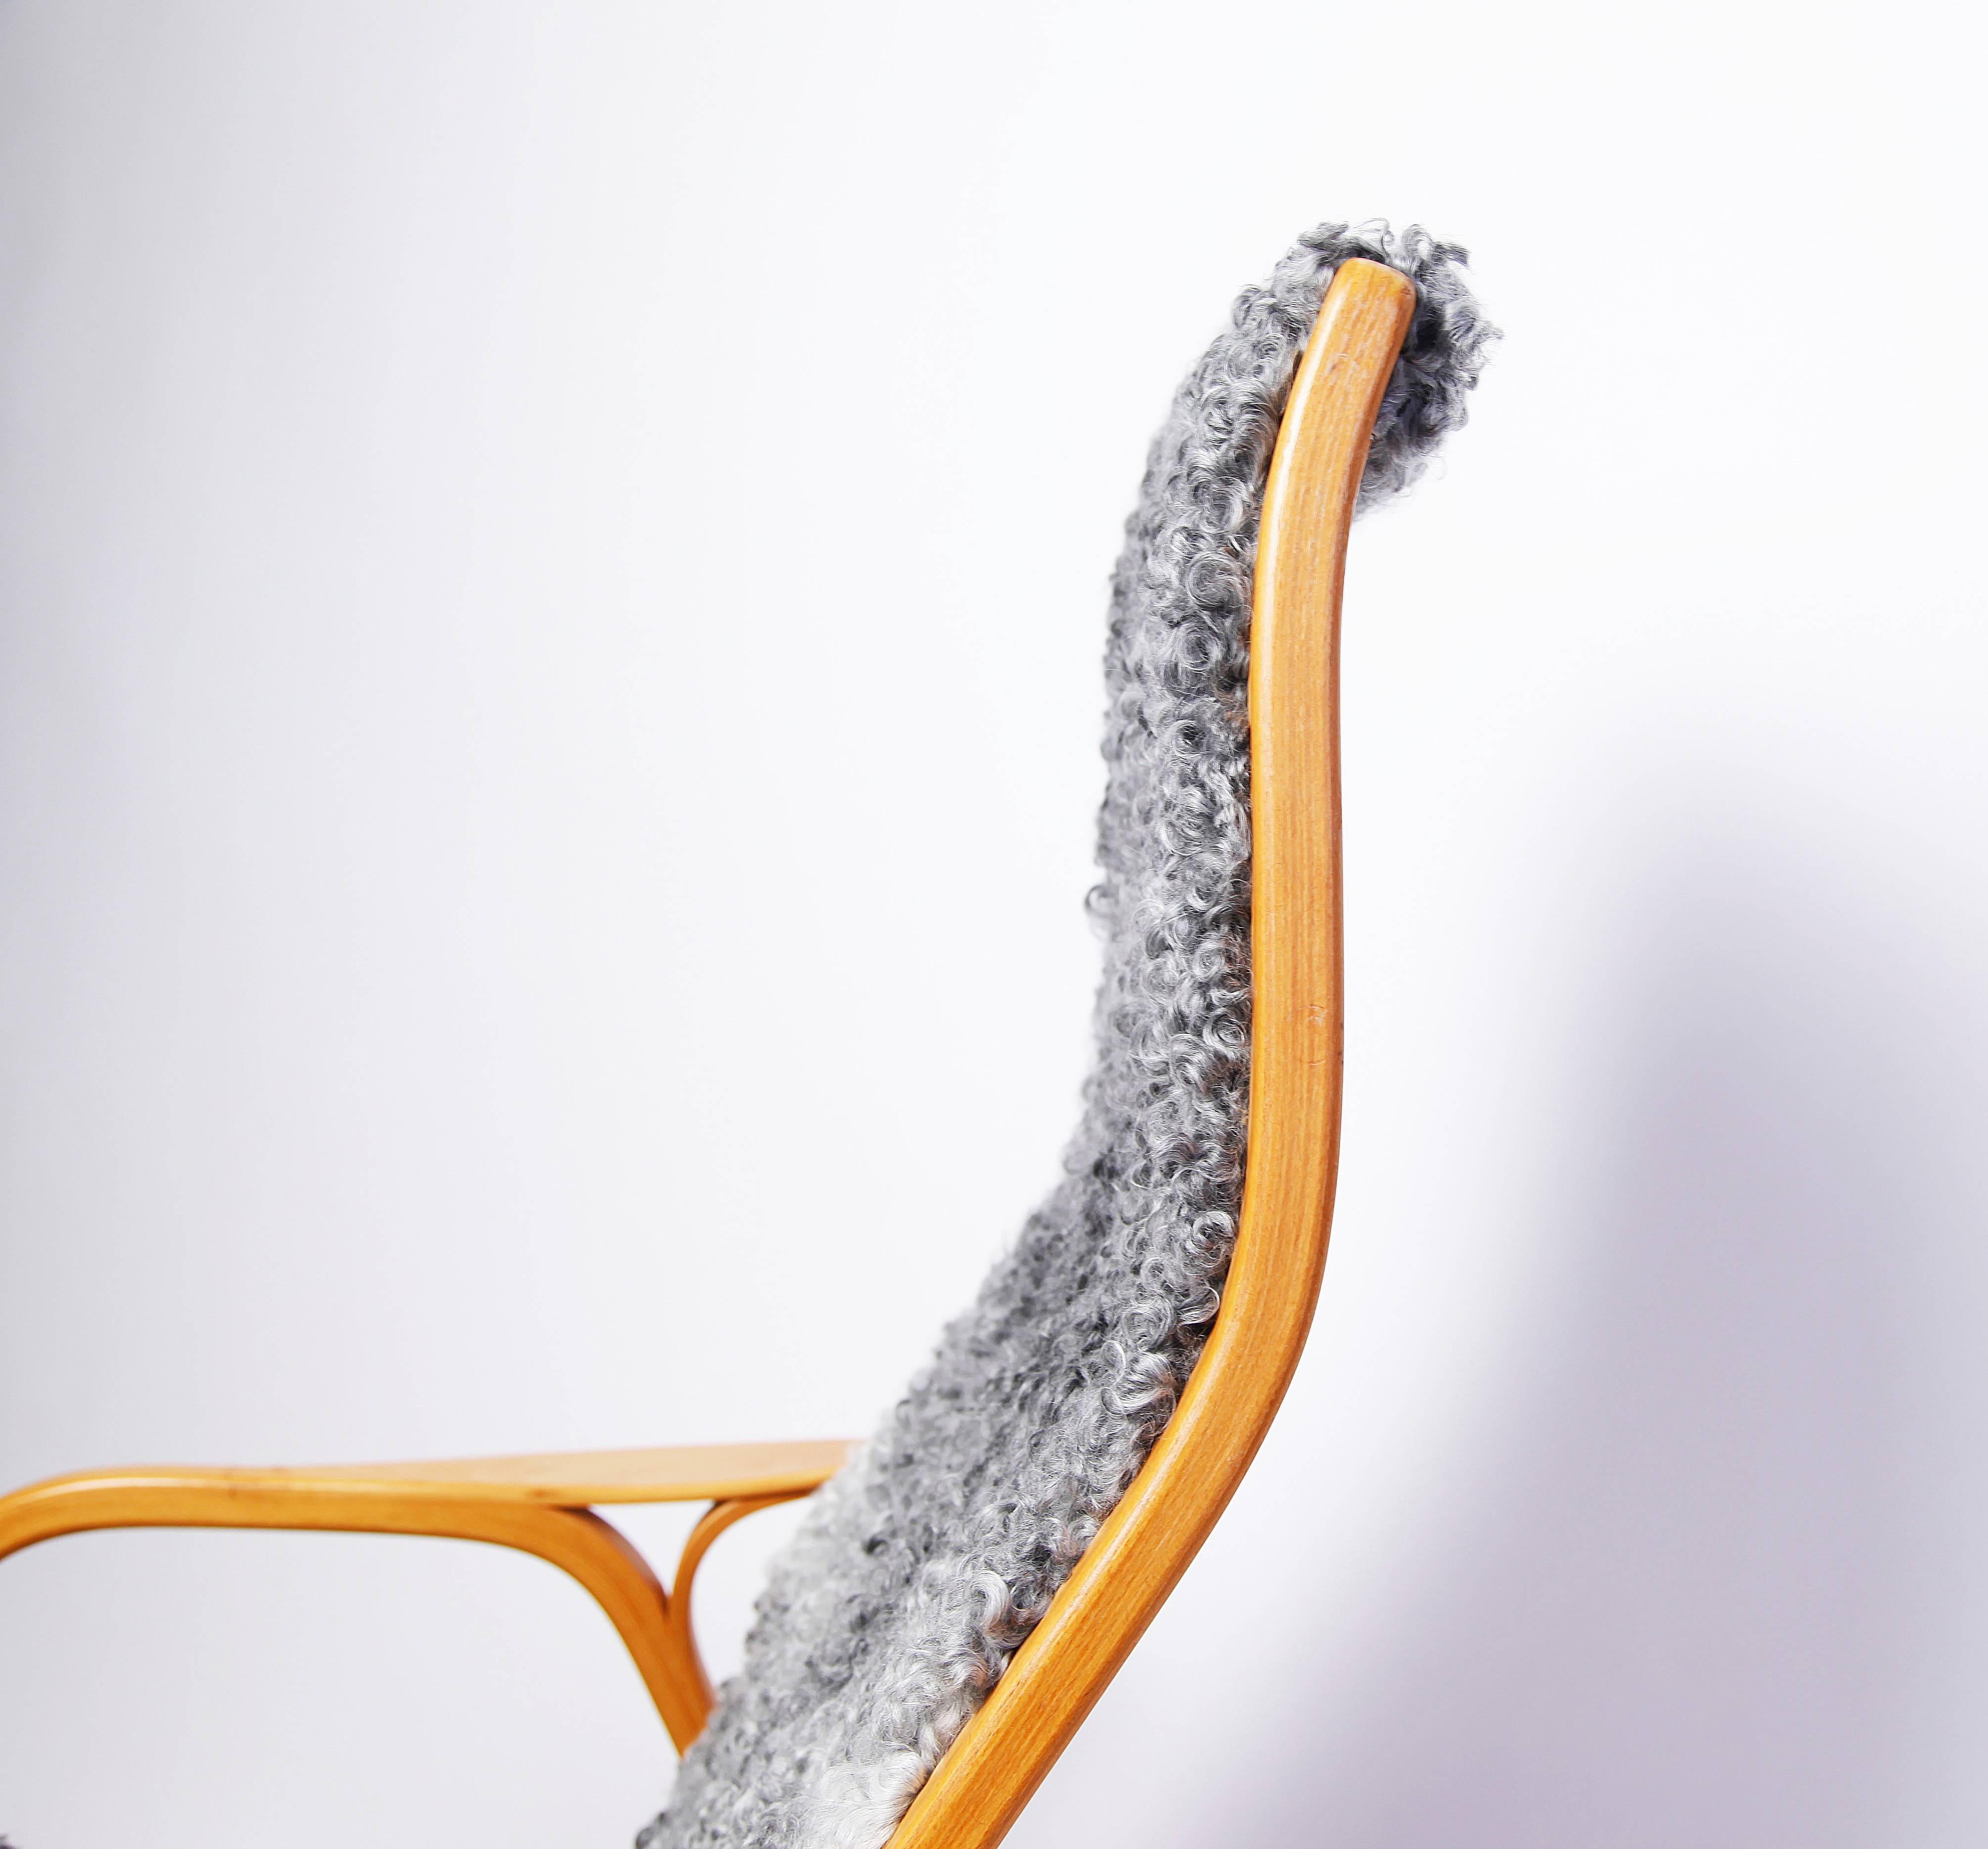 “To have designed one good chair might not be a bad life’s work." Yngve Ekström

When a Swedish interior magazine asked its readers to vote for their single favorite design of the 20th century, they chose the Lamino easy chair, designed for